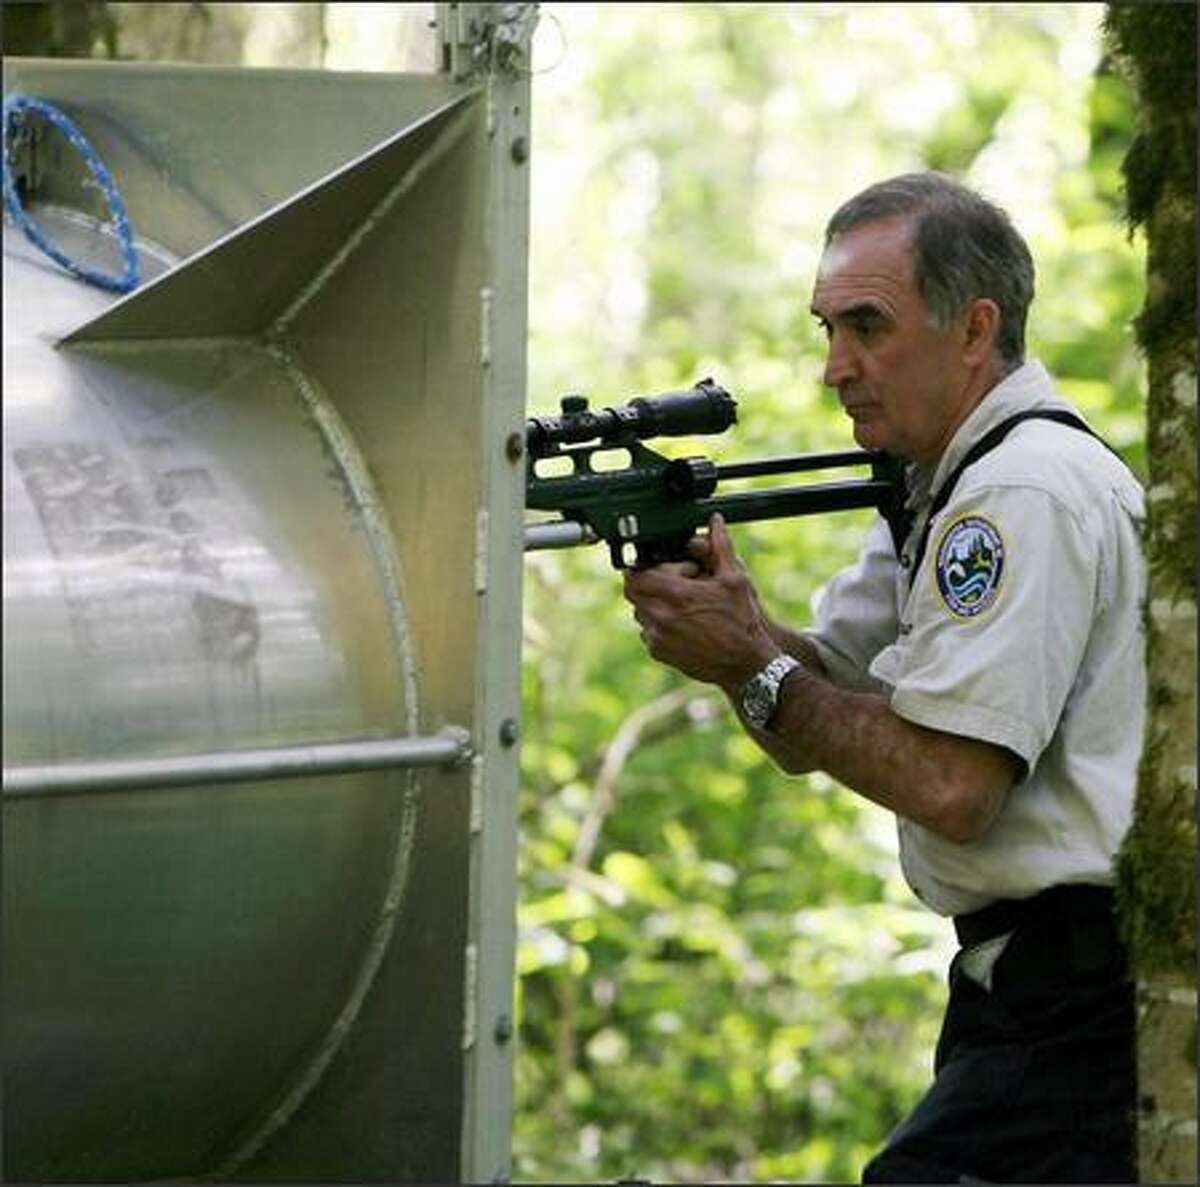 Wildlife Biologist Rocky Spencer of the State of Washington Department of Fish and Wildlife fires a tranquilizer dart into the black bear. The bear was captured in a trap on Weyerhauser property in Federal Way near company headquarters.